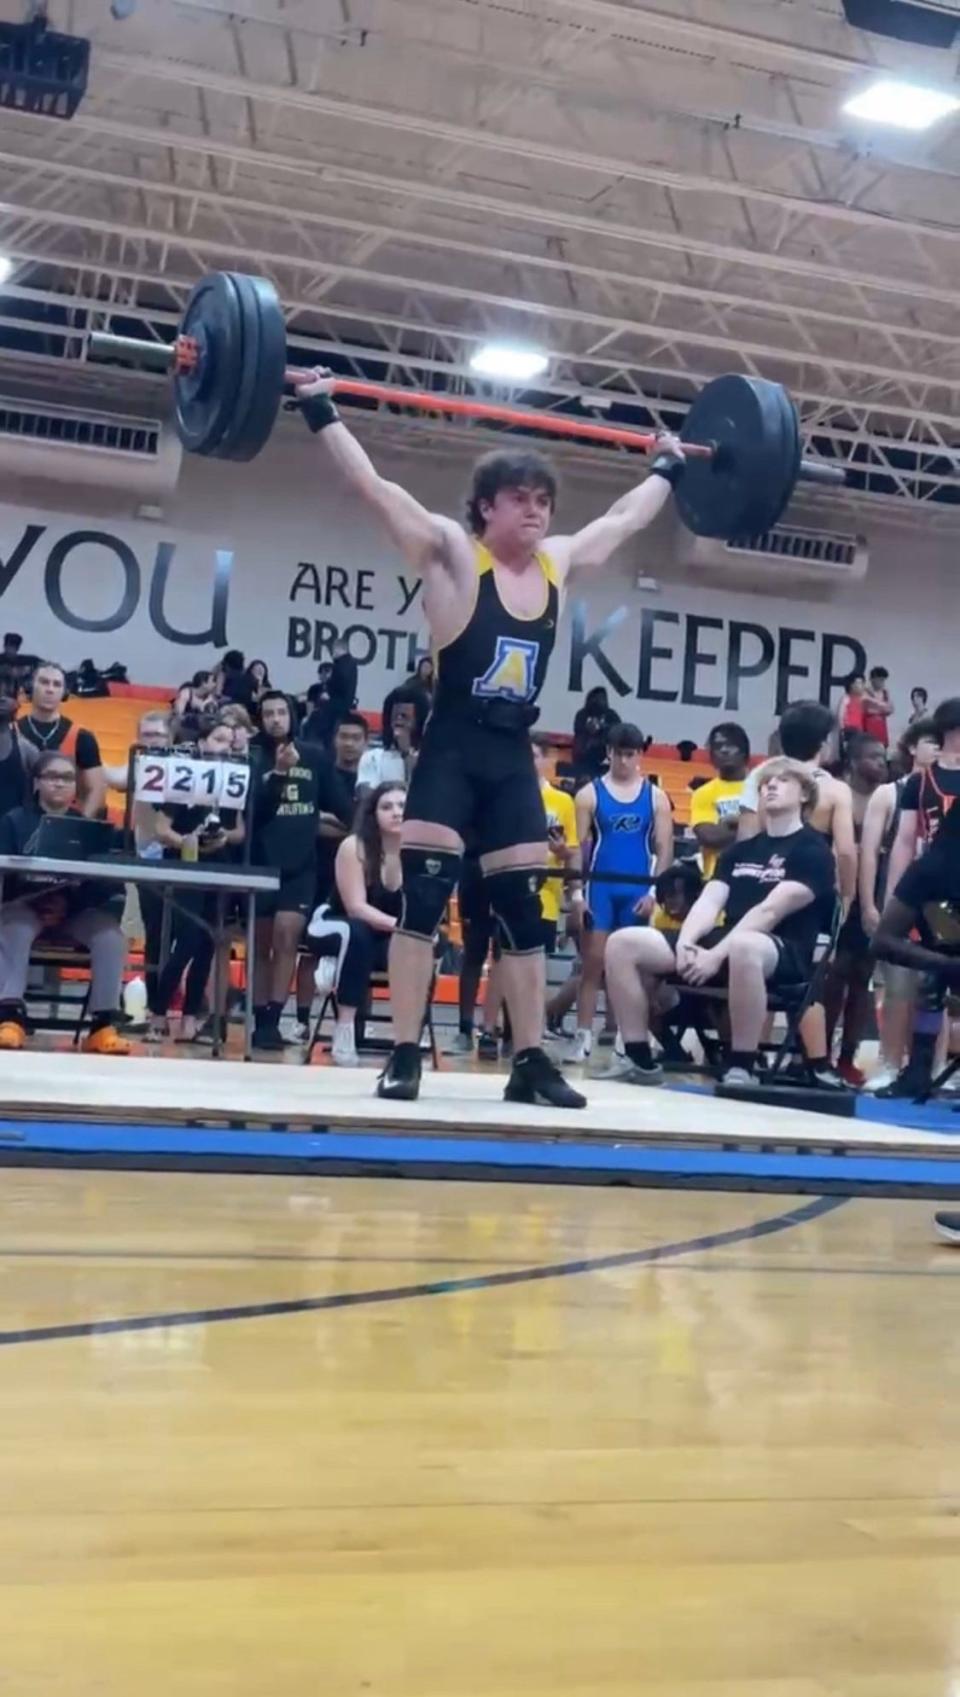 Auburndale's Gavin Chastain won both Traditional and Olympic county titles at Lake Wales High School on March 8 at Lake Wales High School.